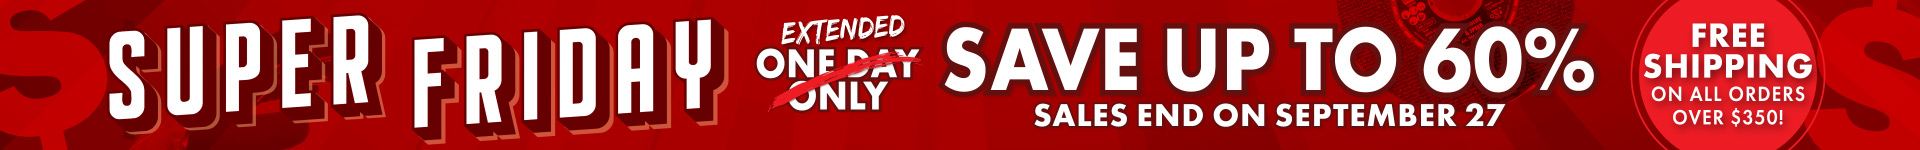 Super Friday Sale Extended